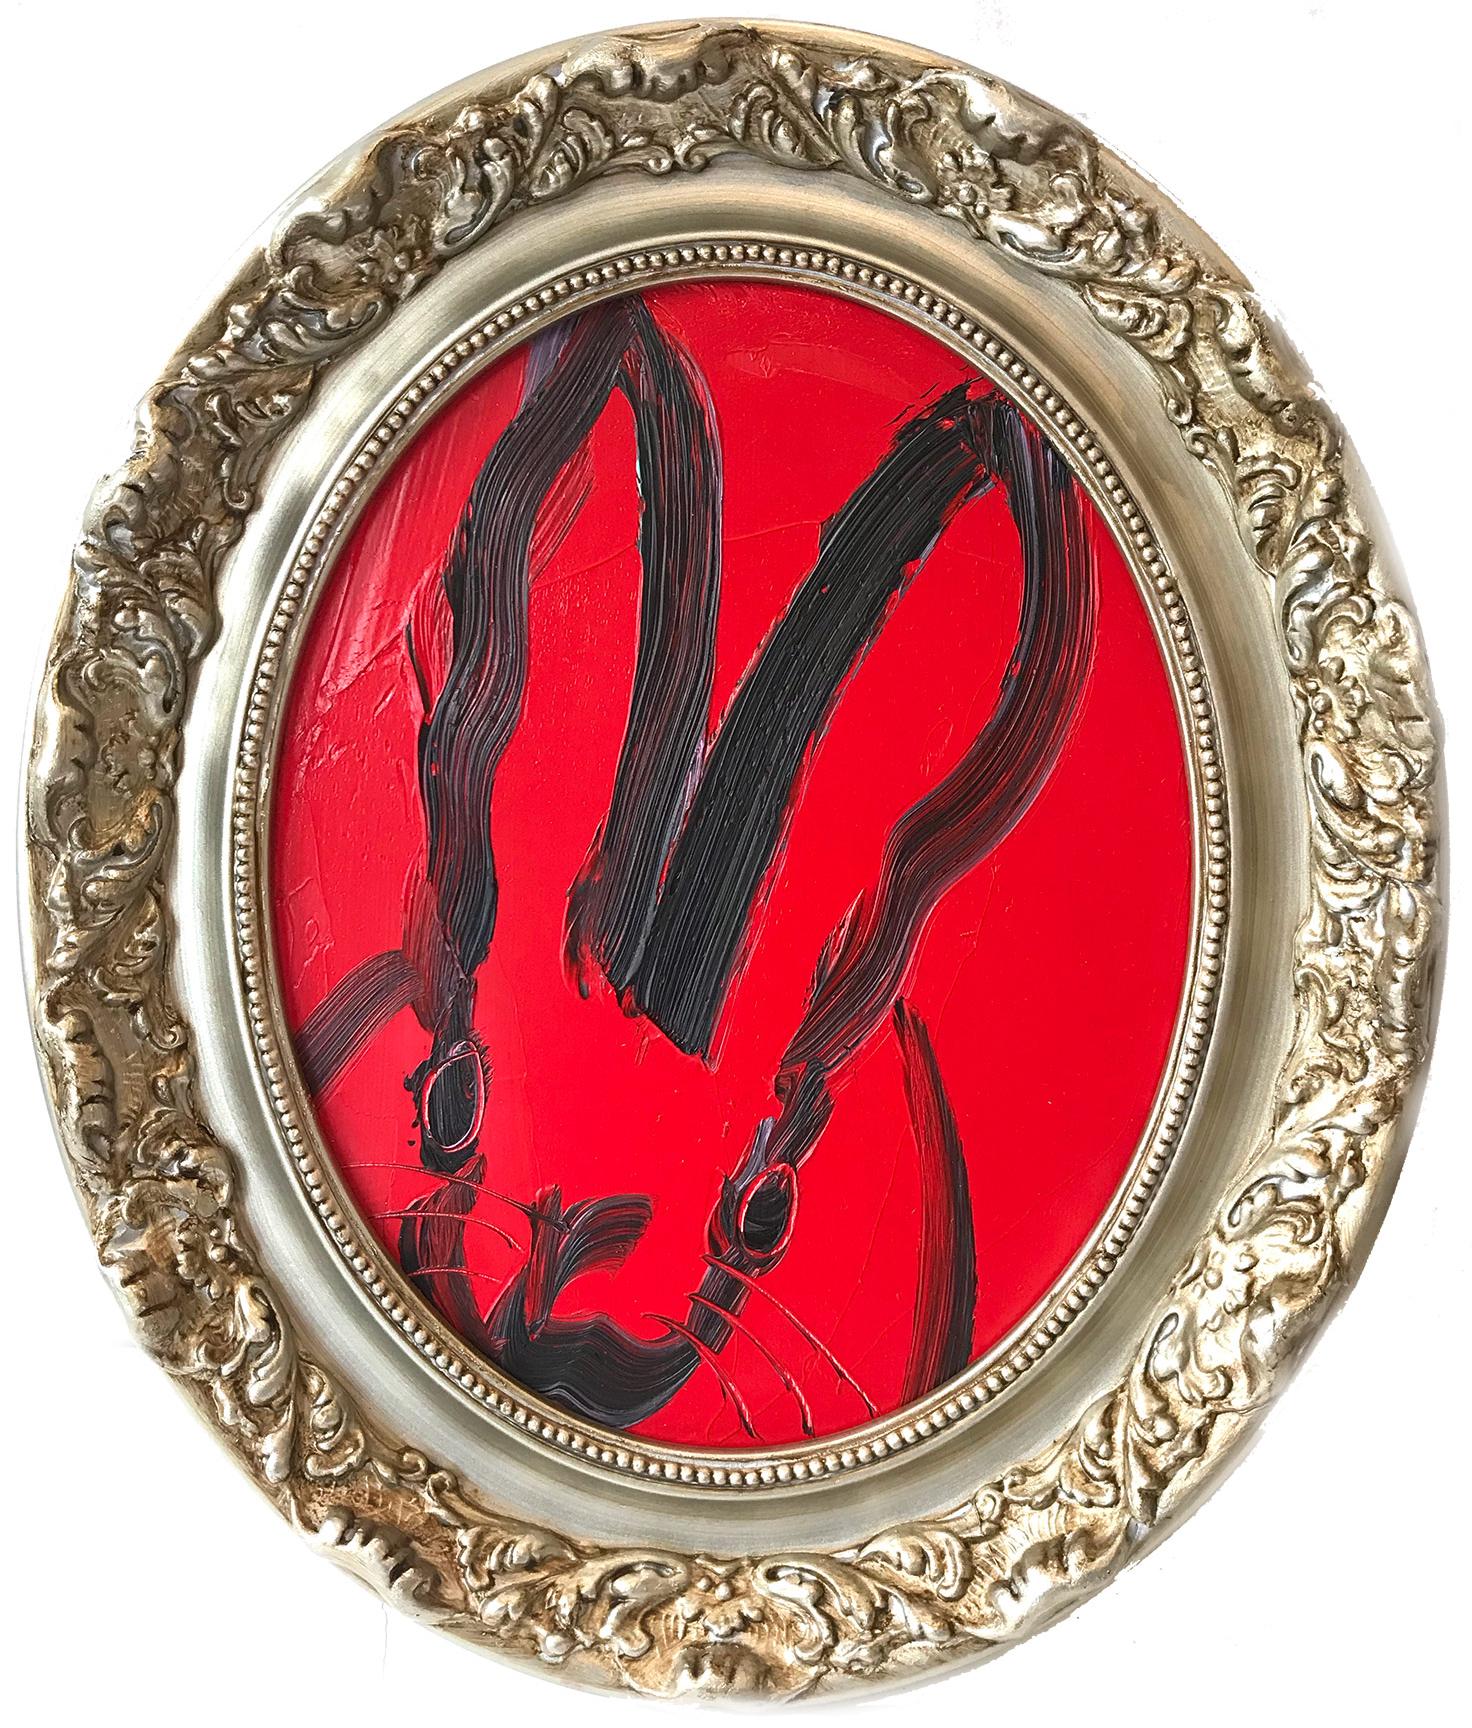 "Rover" (Oval Black Outlined Bunny on Scarlet Red Background)